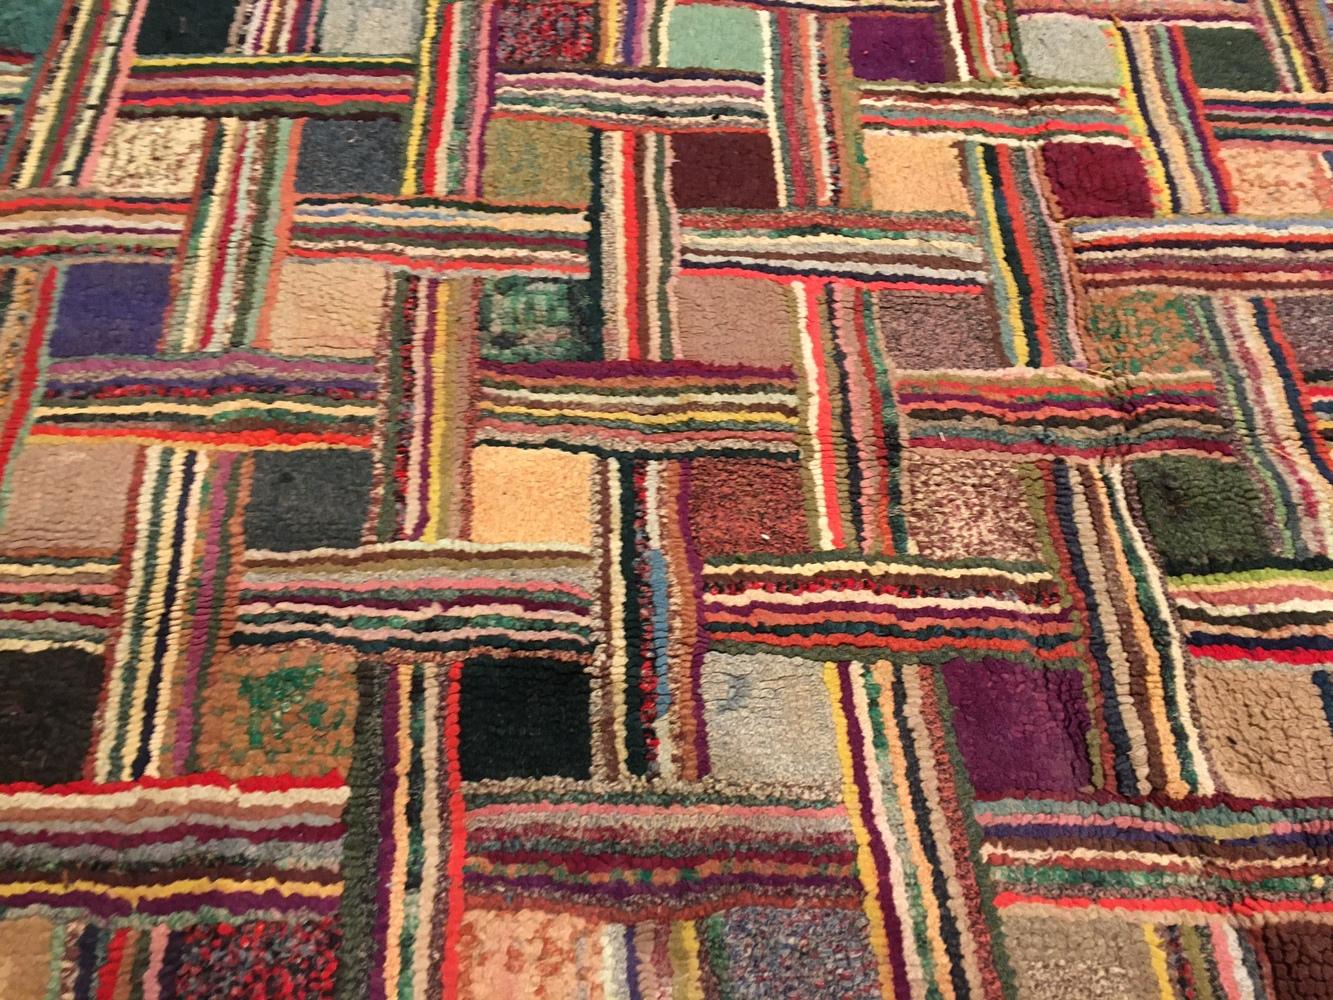 20th Century Early American Hooked Rug. Size: 8 ft 7 in x 12 ft 6 in (2.62 m x 3.81 m)